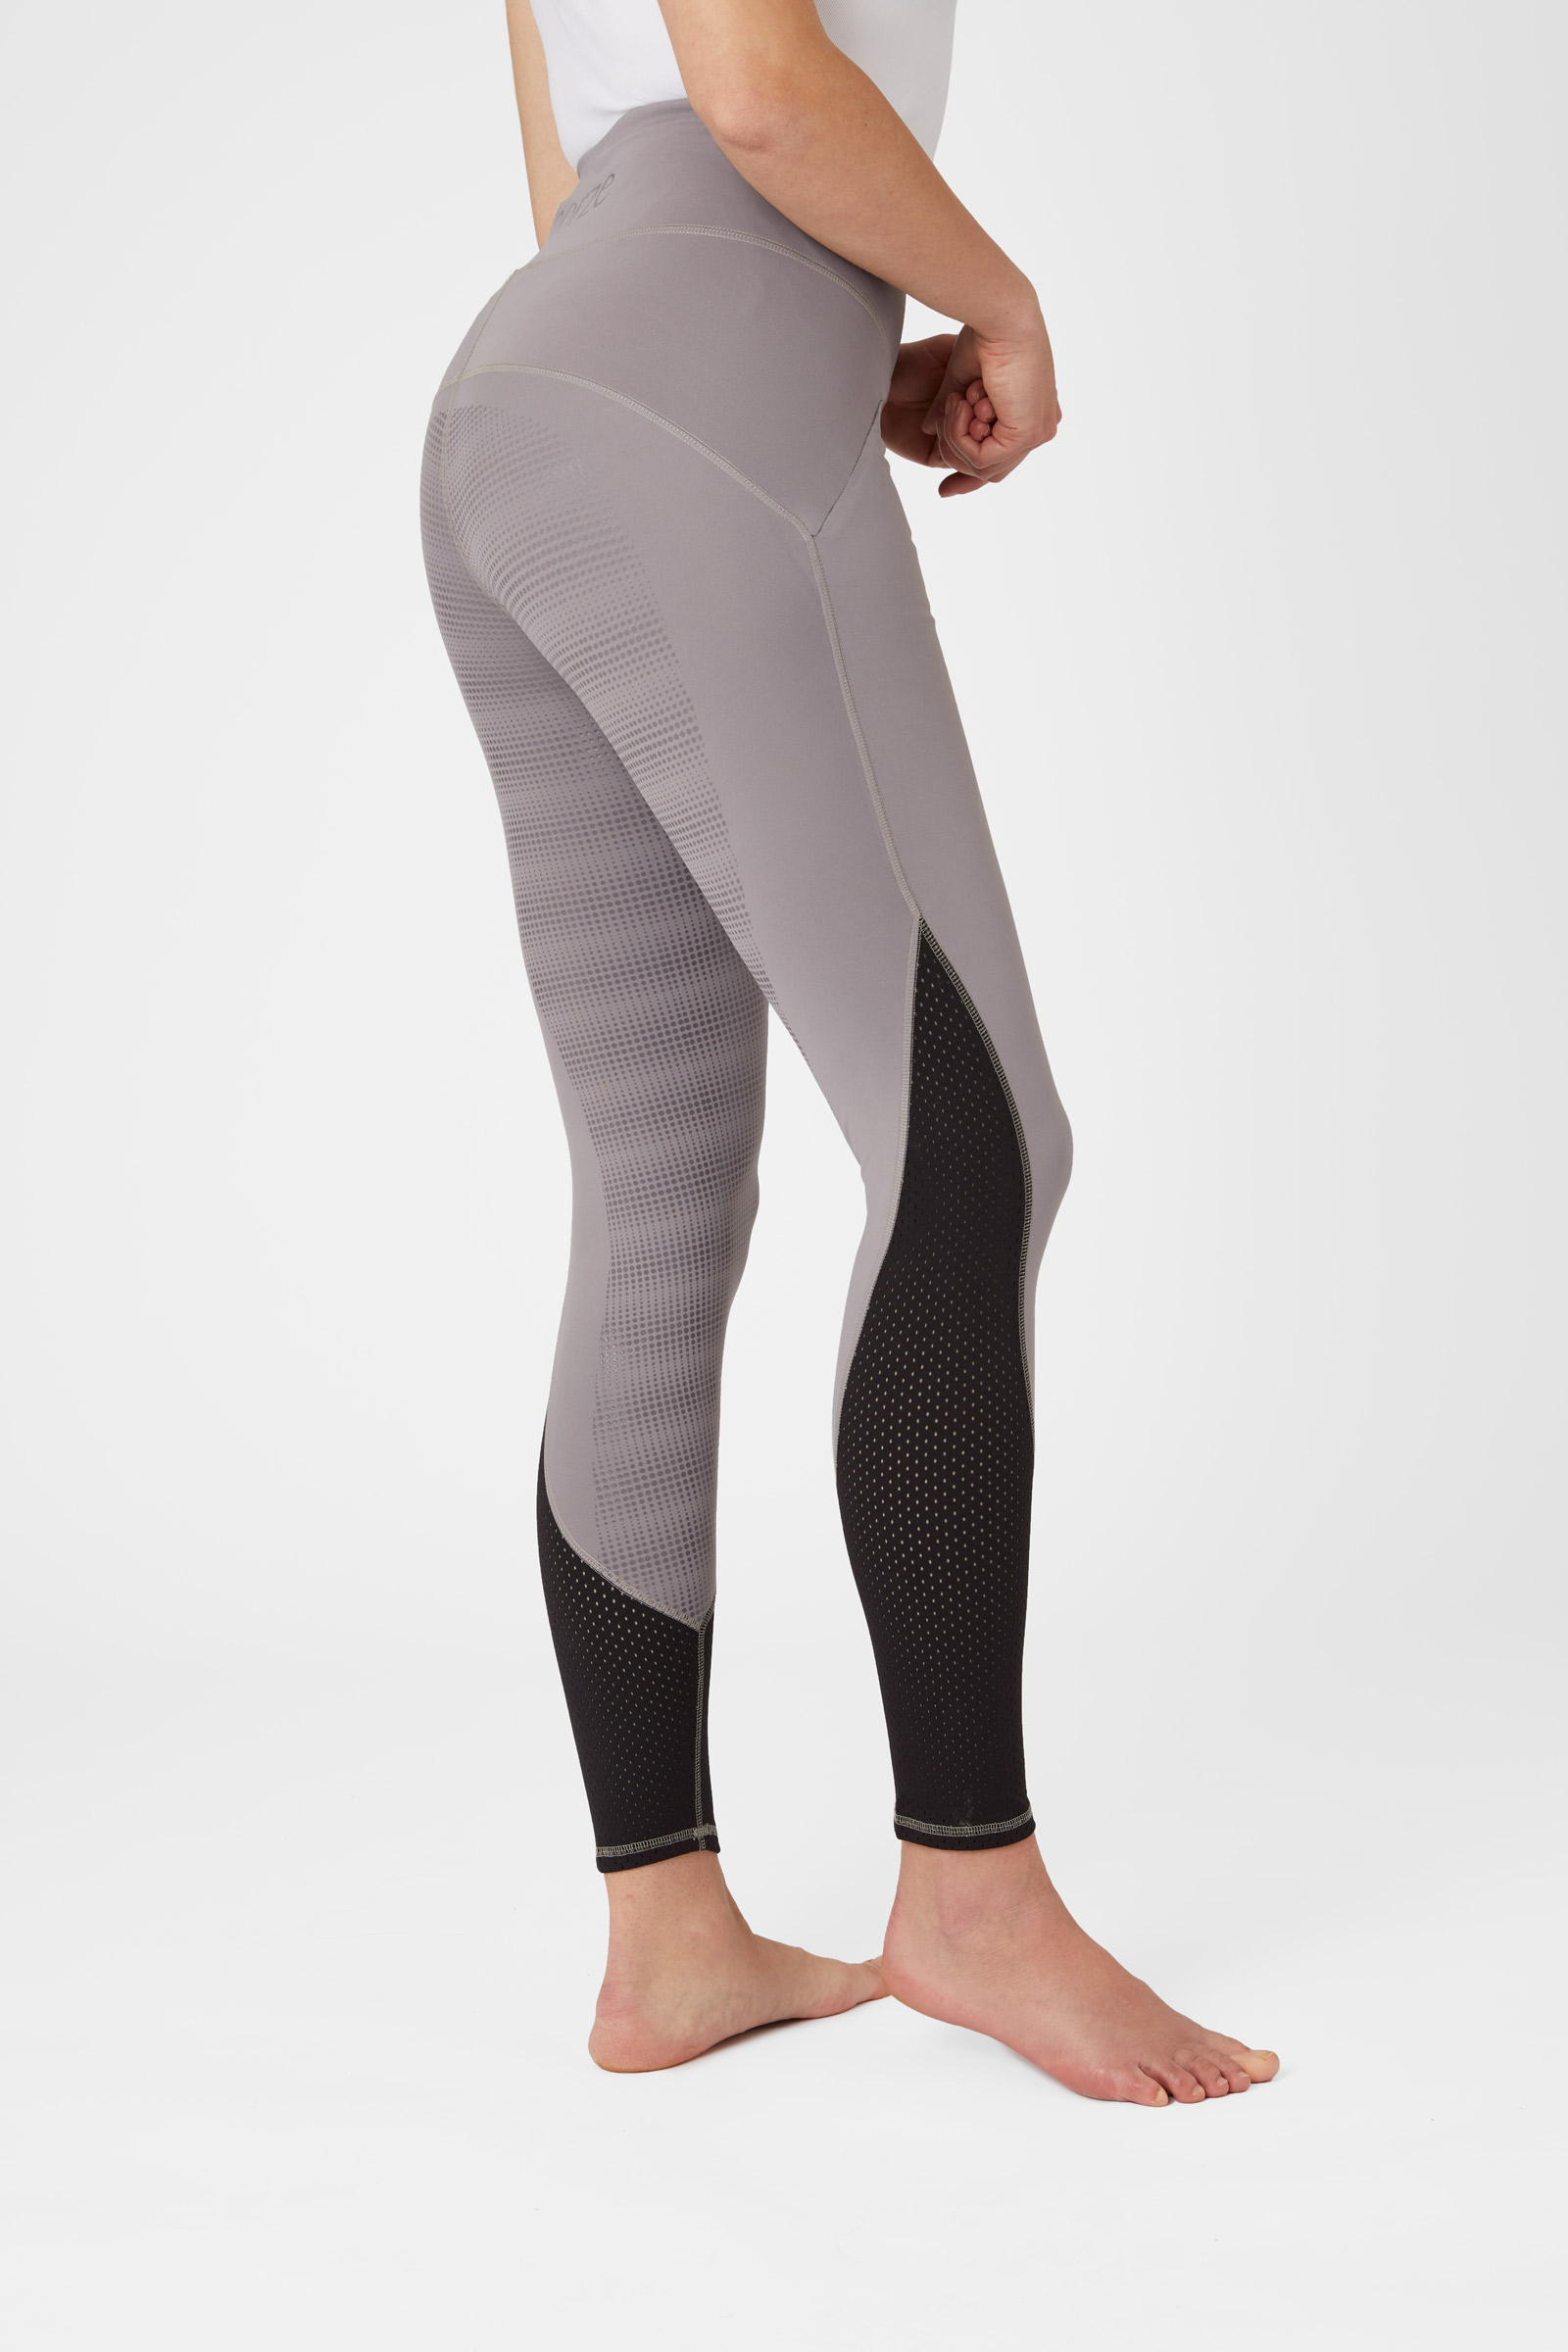 Buy Horze Women's Full Seat Tights With Mesh Leg Bottoms, 59% OFF